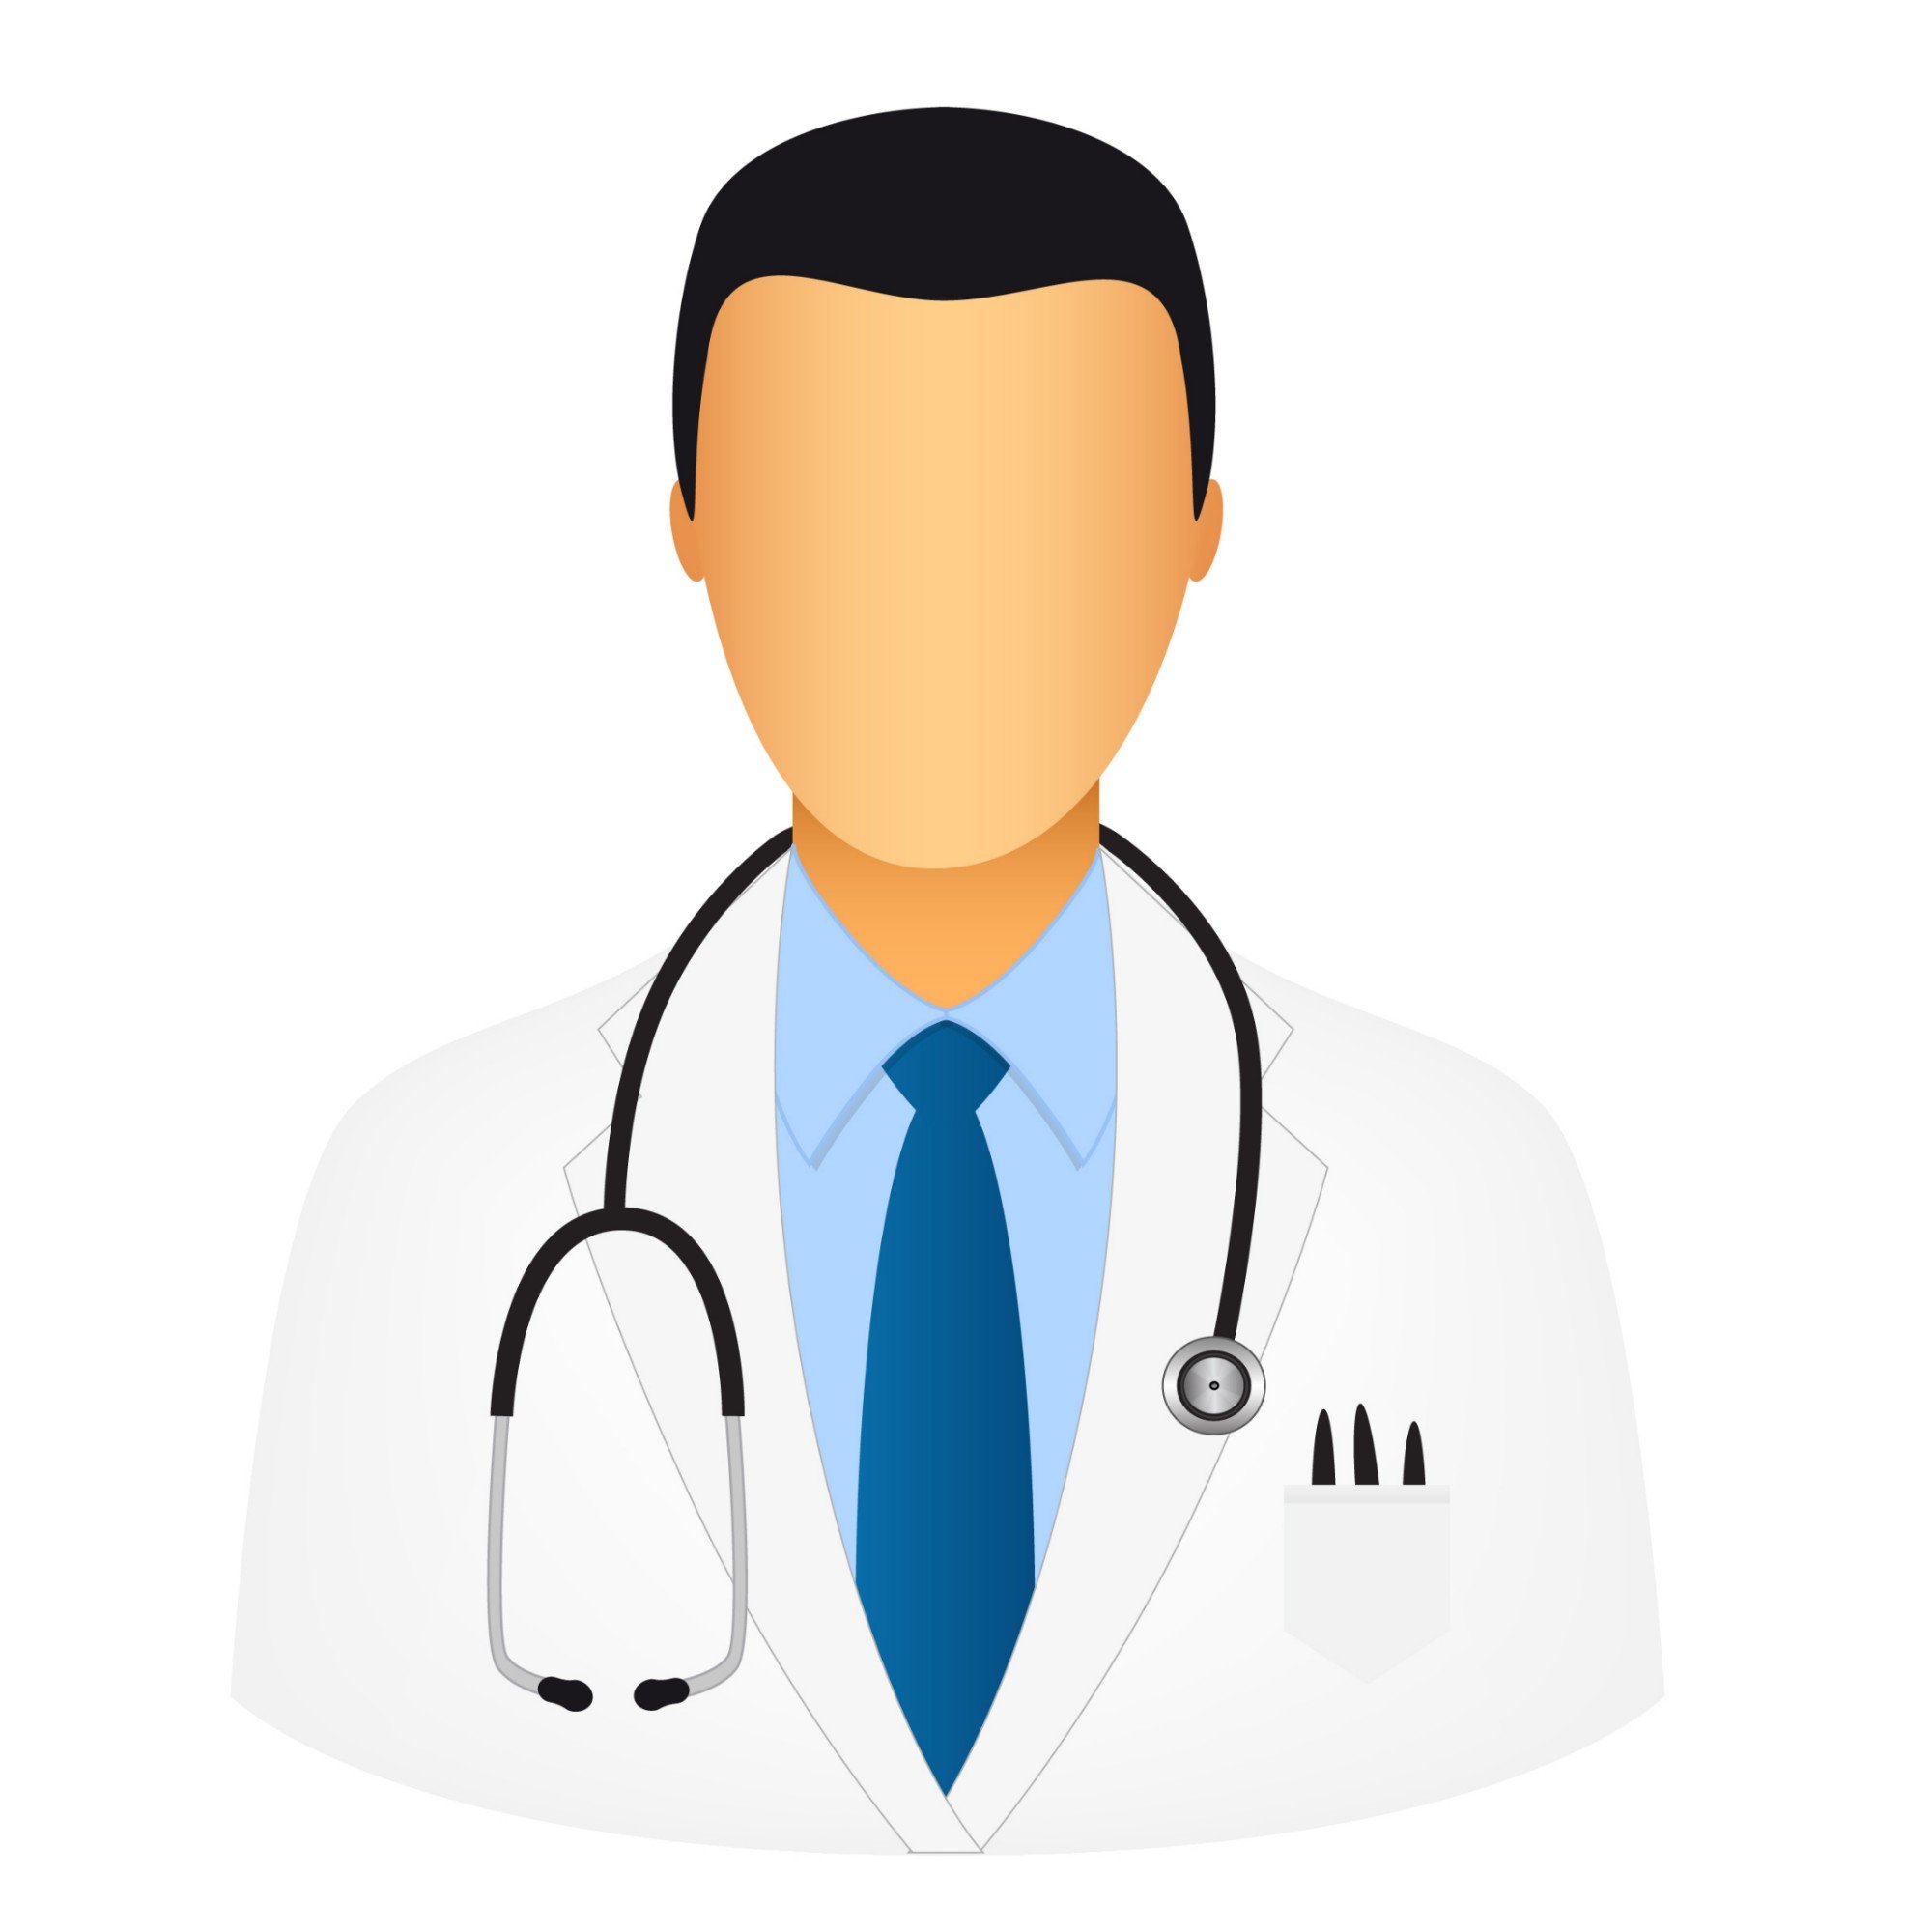 We provide Chronic Care Management Software and Services for Doctors.